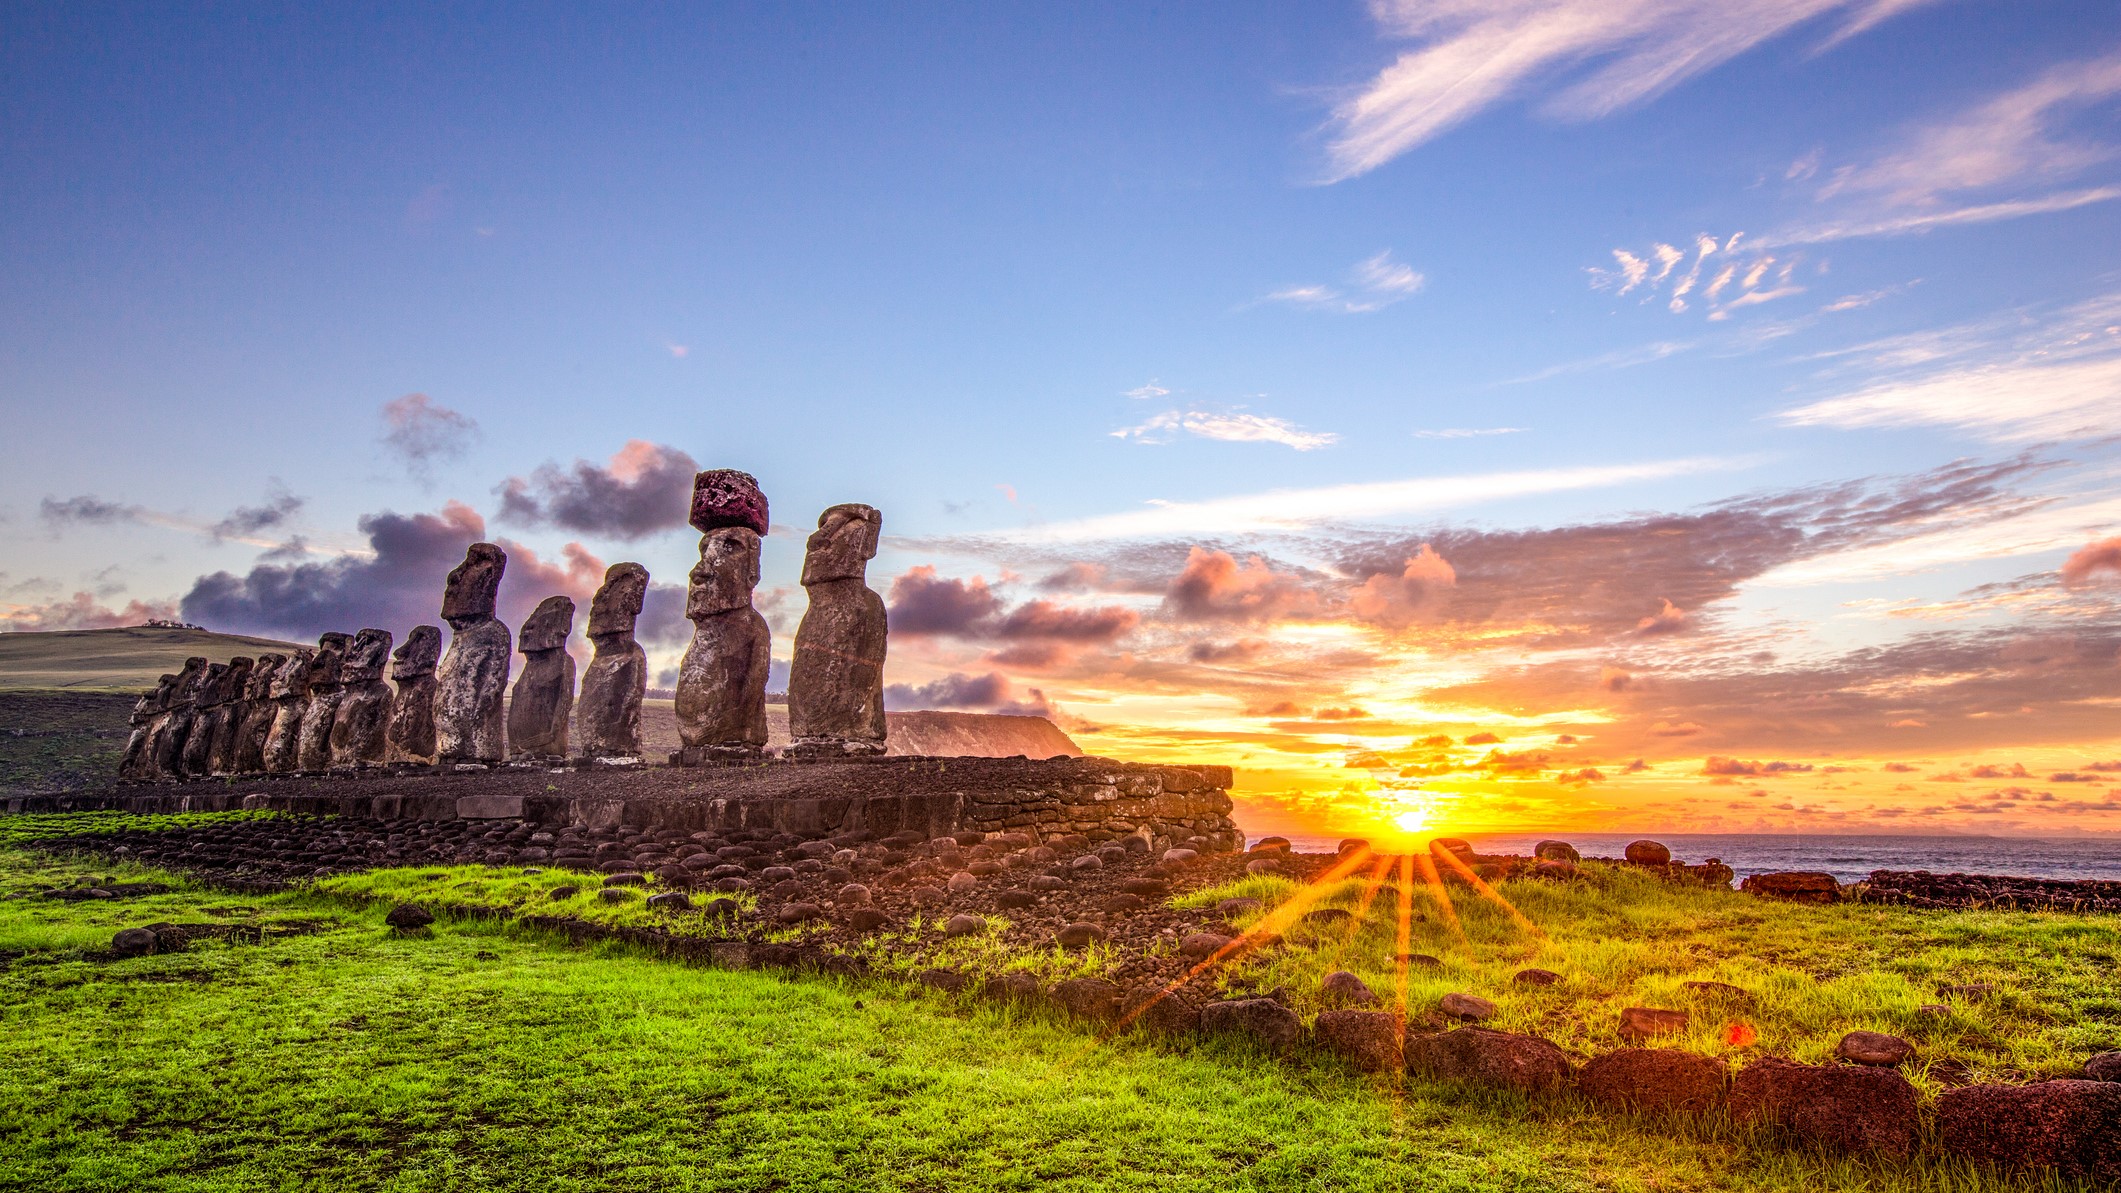 a row of moai statue heads are in the foreground with a rising sun over the ocean in the background.